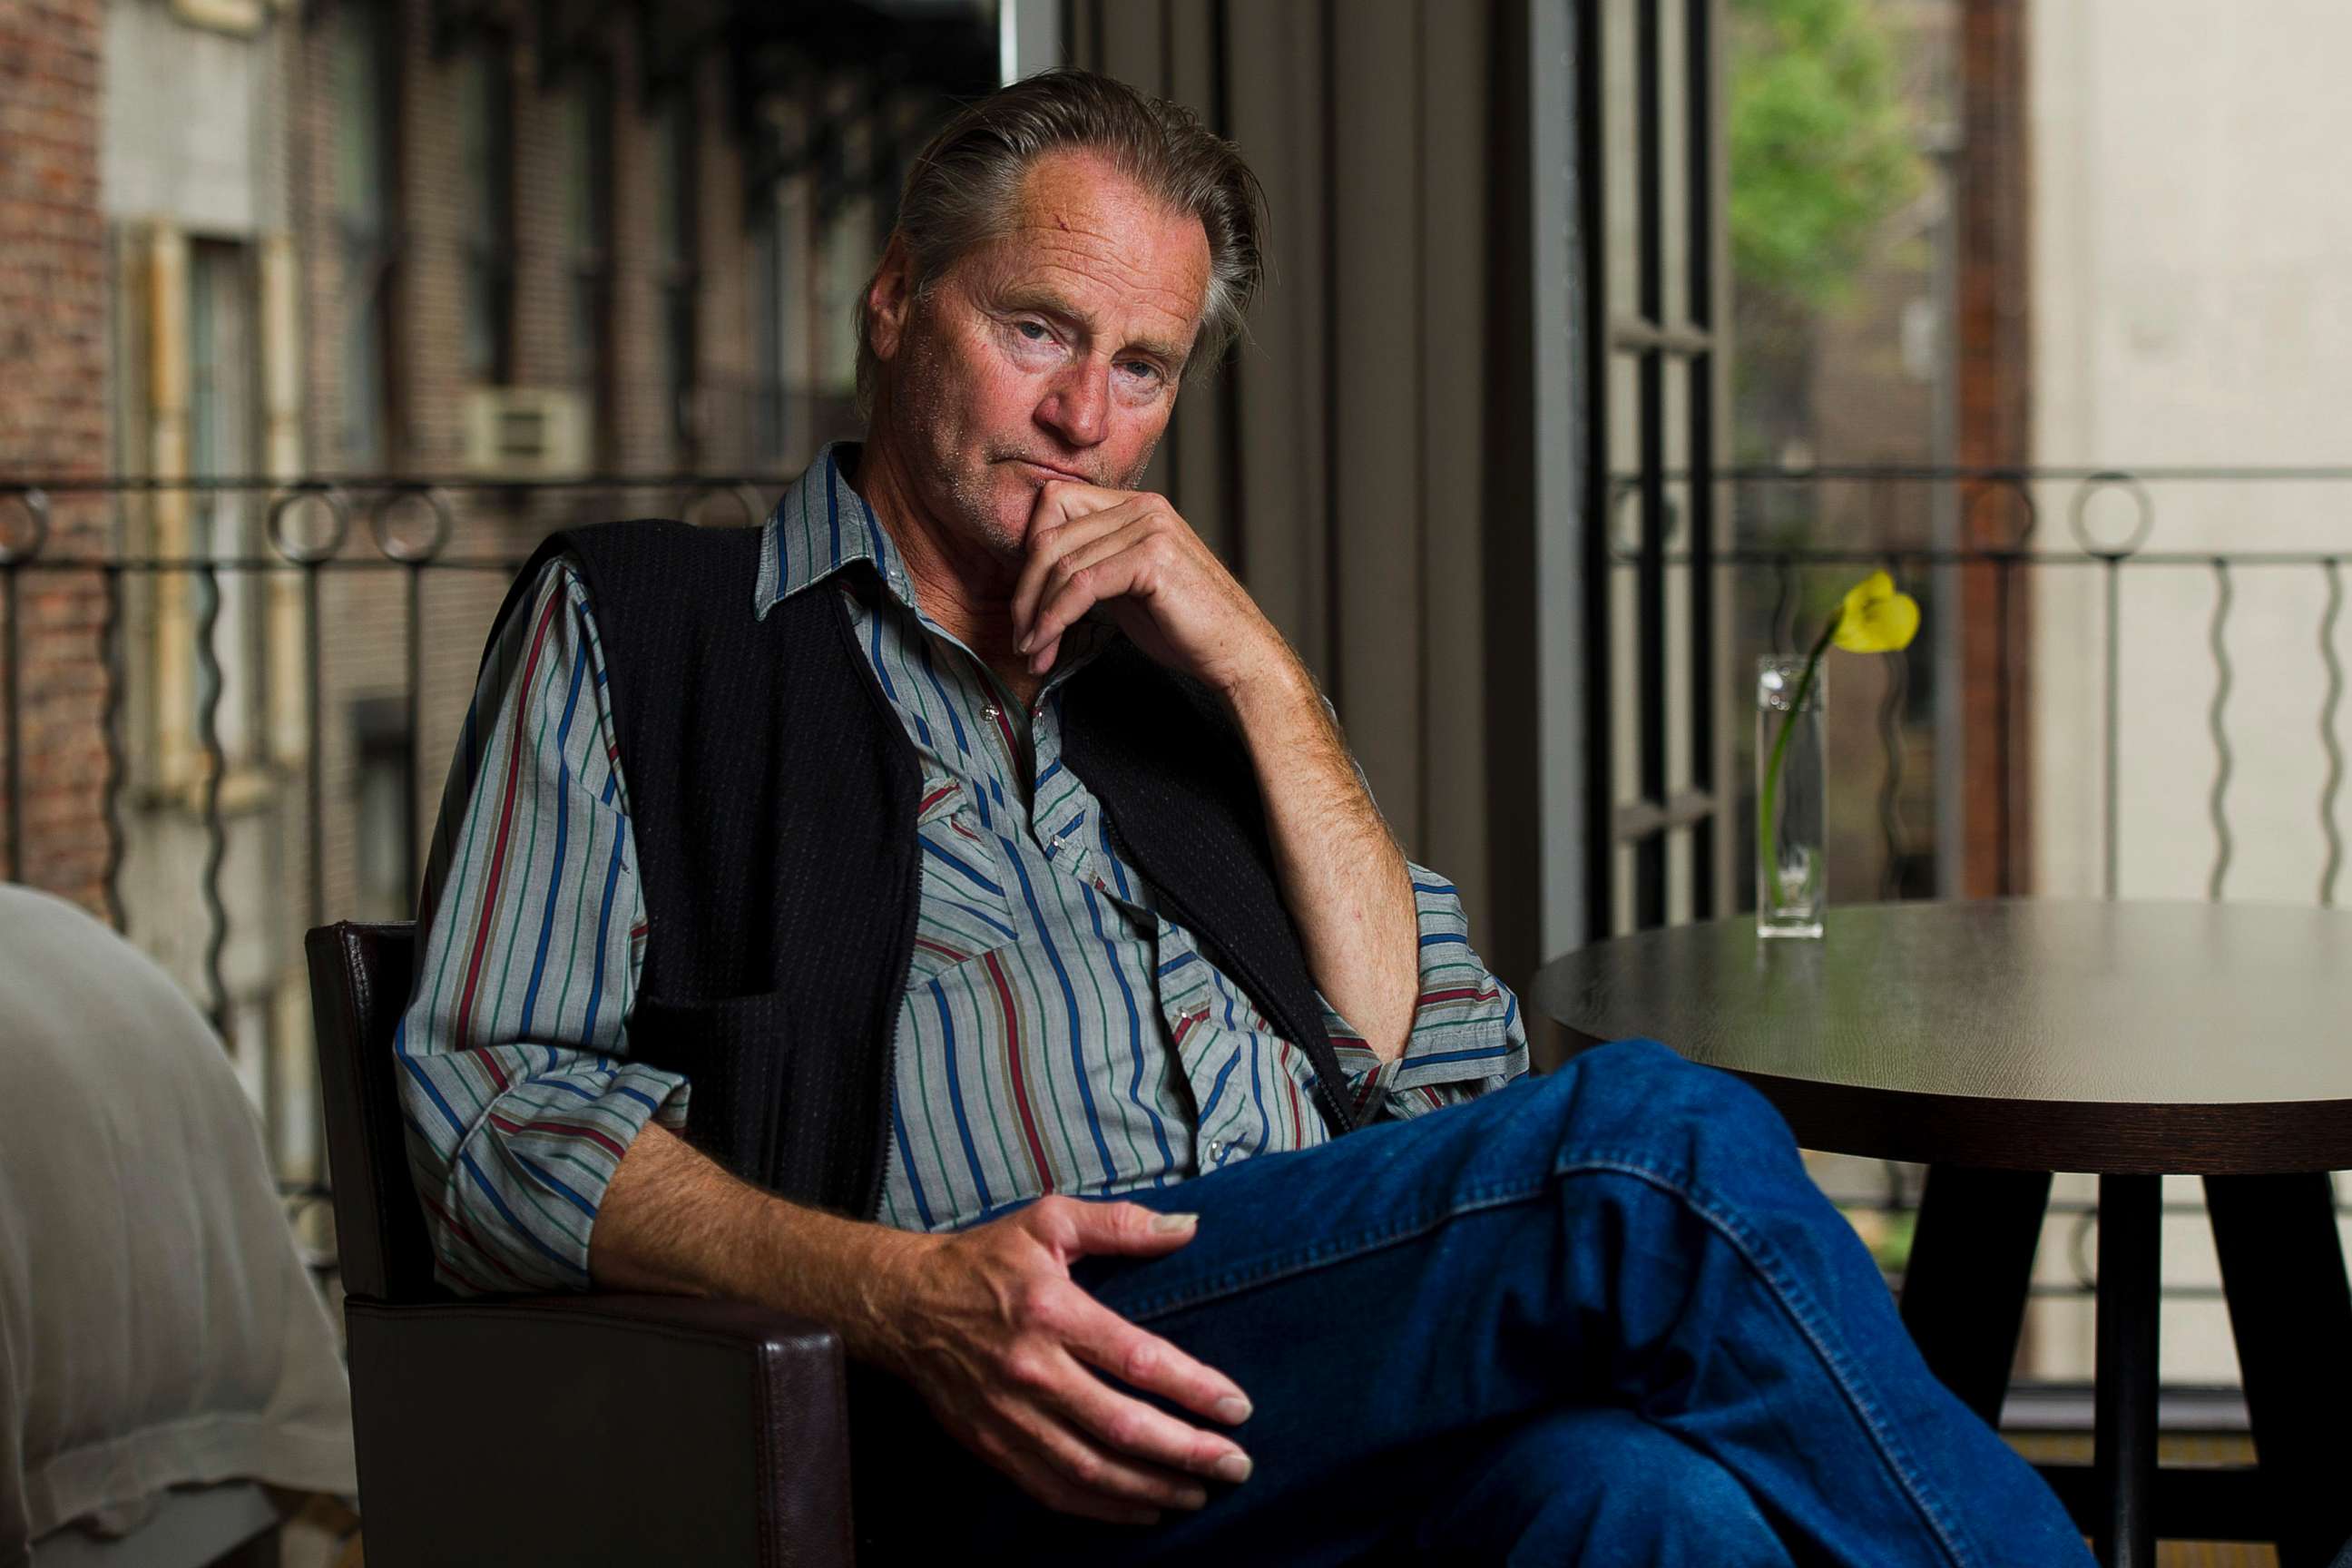 PHOTO: In this Sept. 29, 2011 file photo, actor Sam Shepard poses for a portrait in New York.